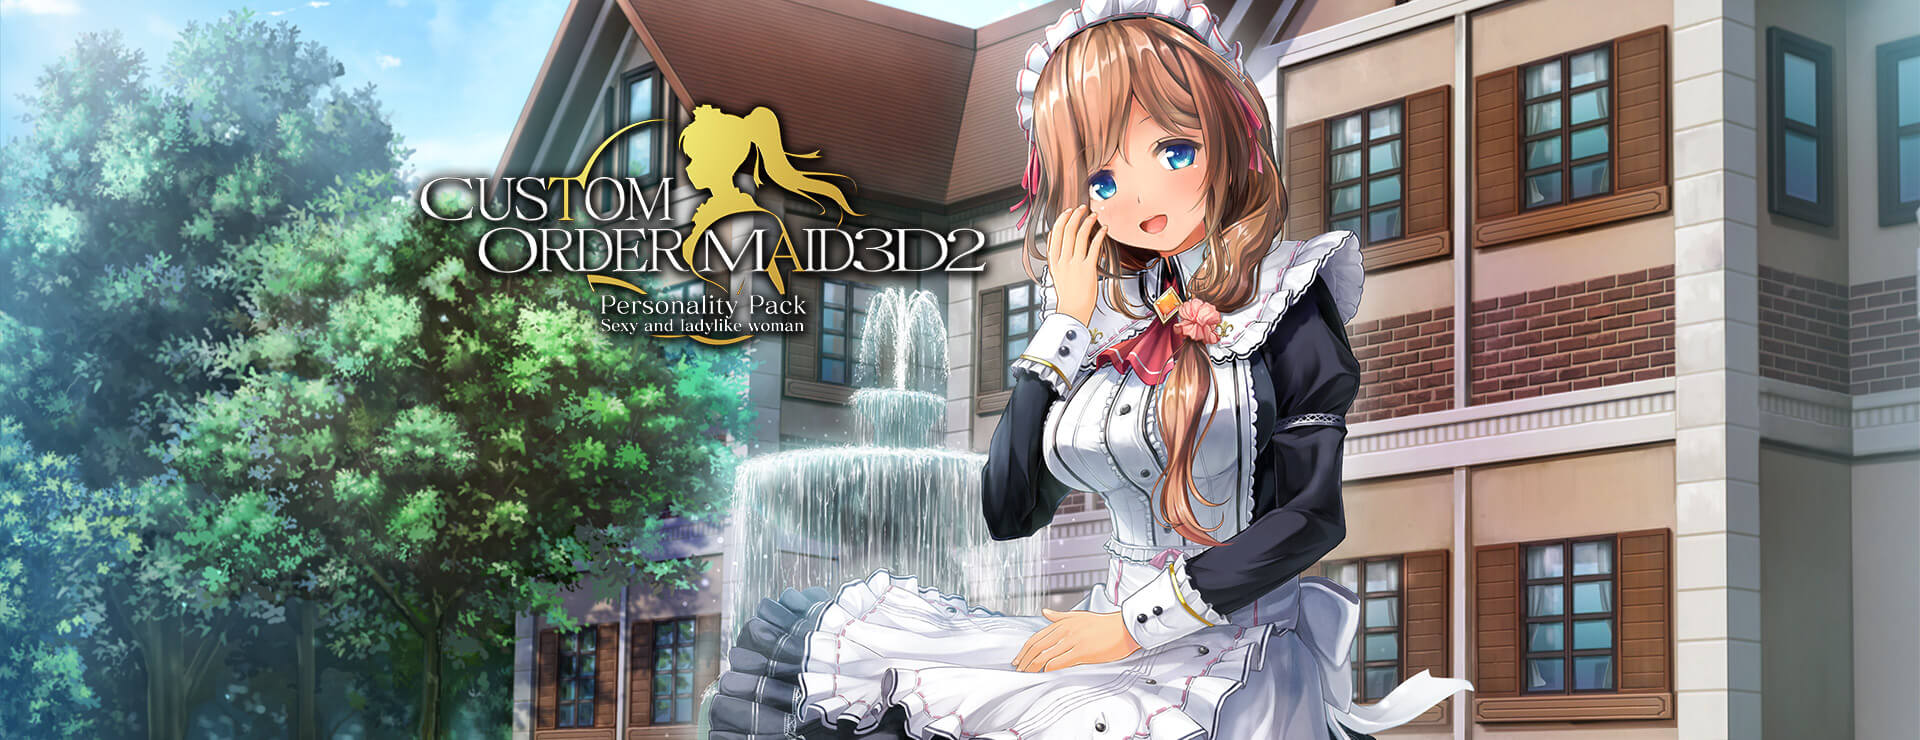 Custom Order Maid 3D2 Sexy and Ladylike Woman DLC - Simulation Game